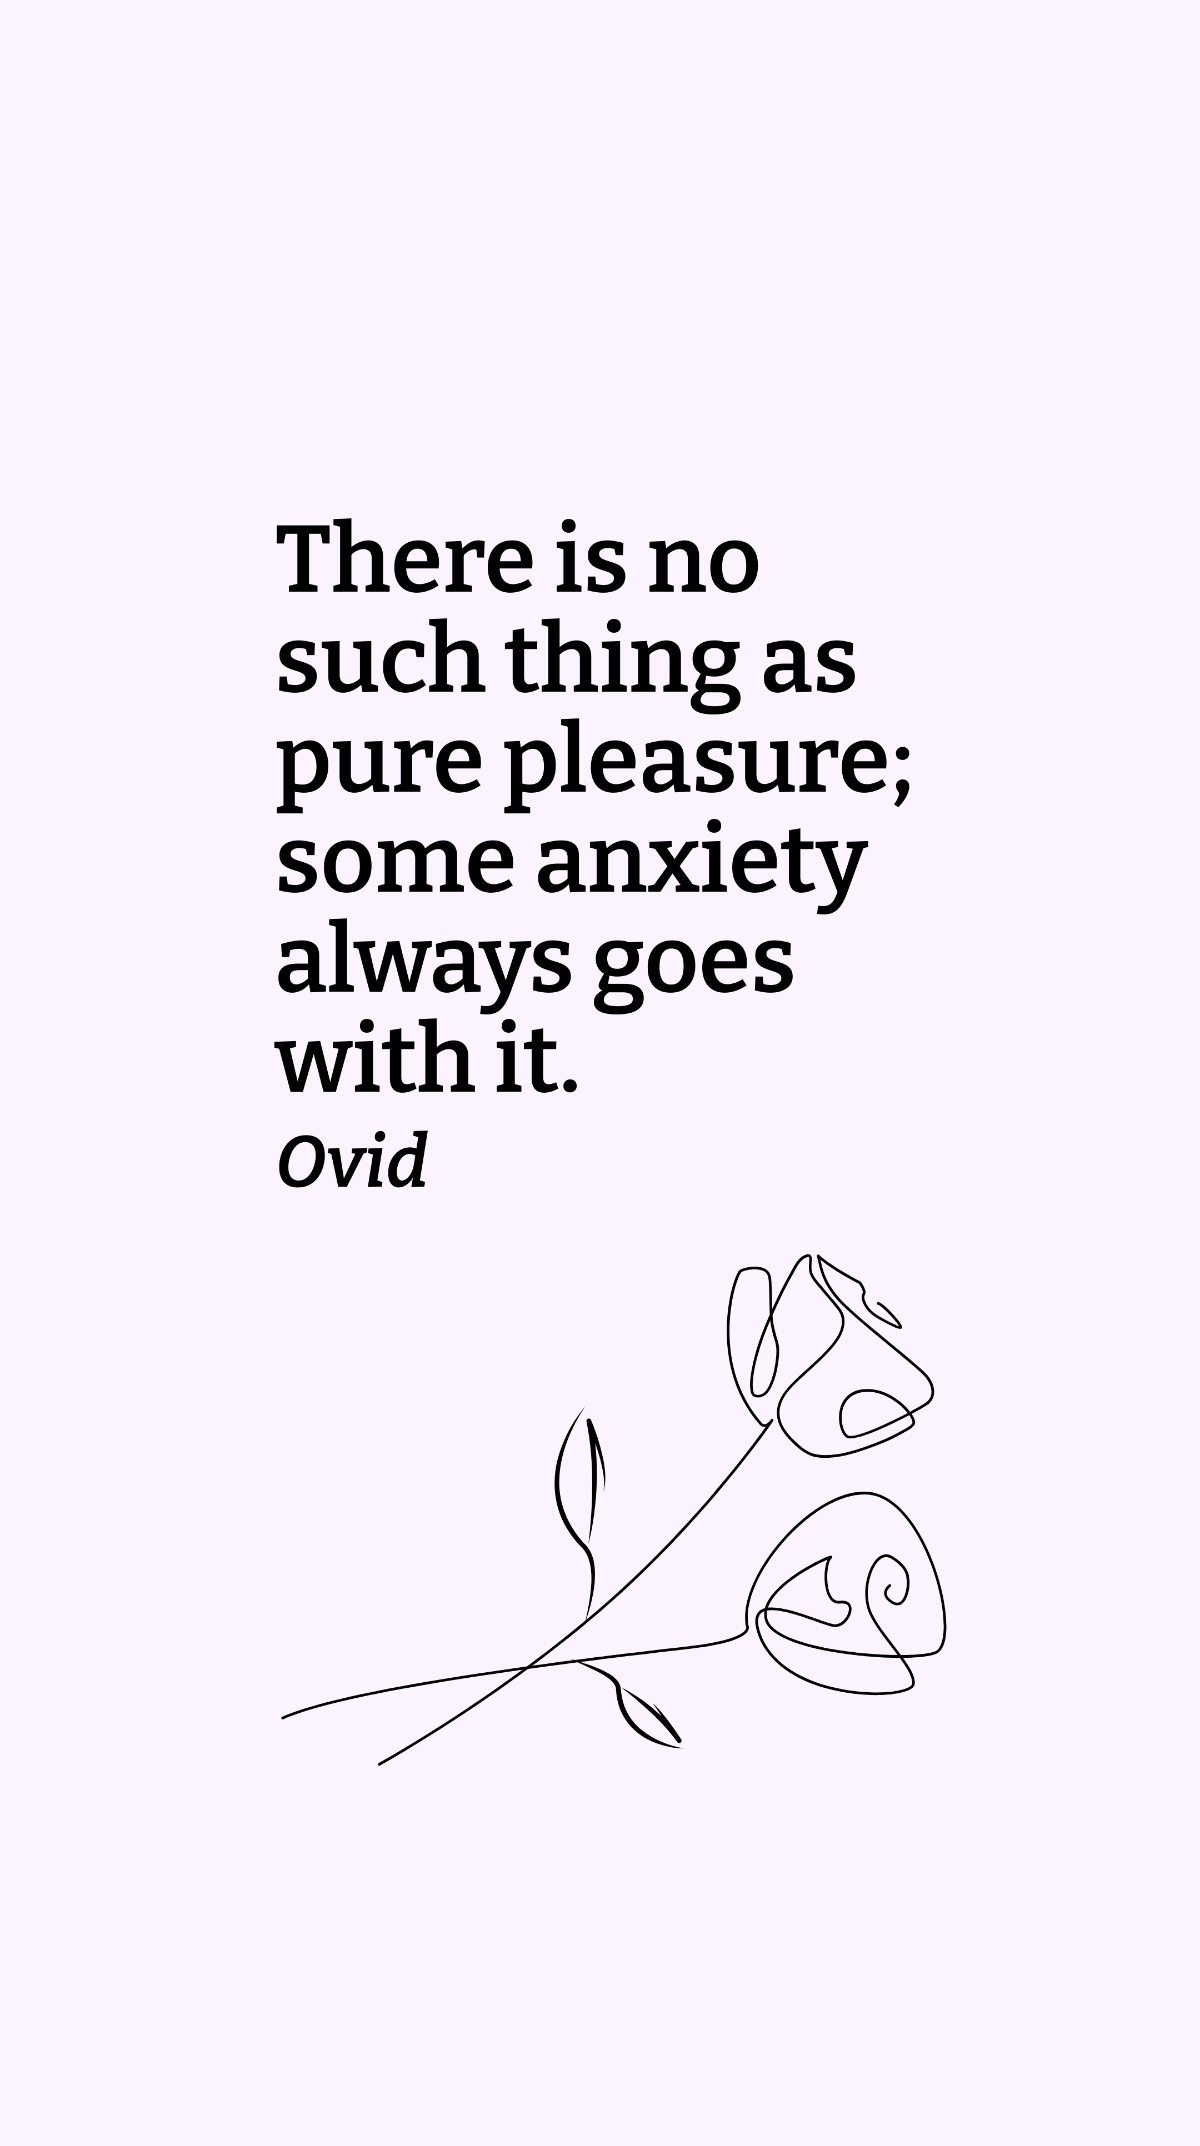 Free Ovid - There is no such thing as pure pleasure; some anxiety always goes with it. Template